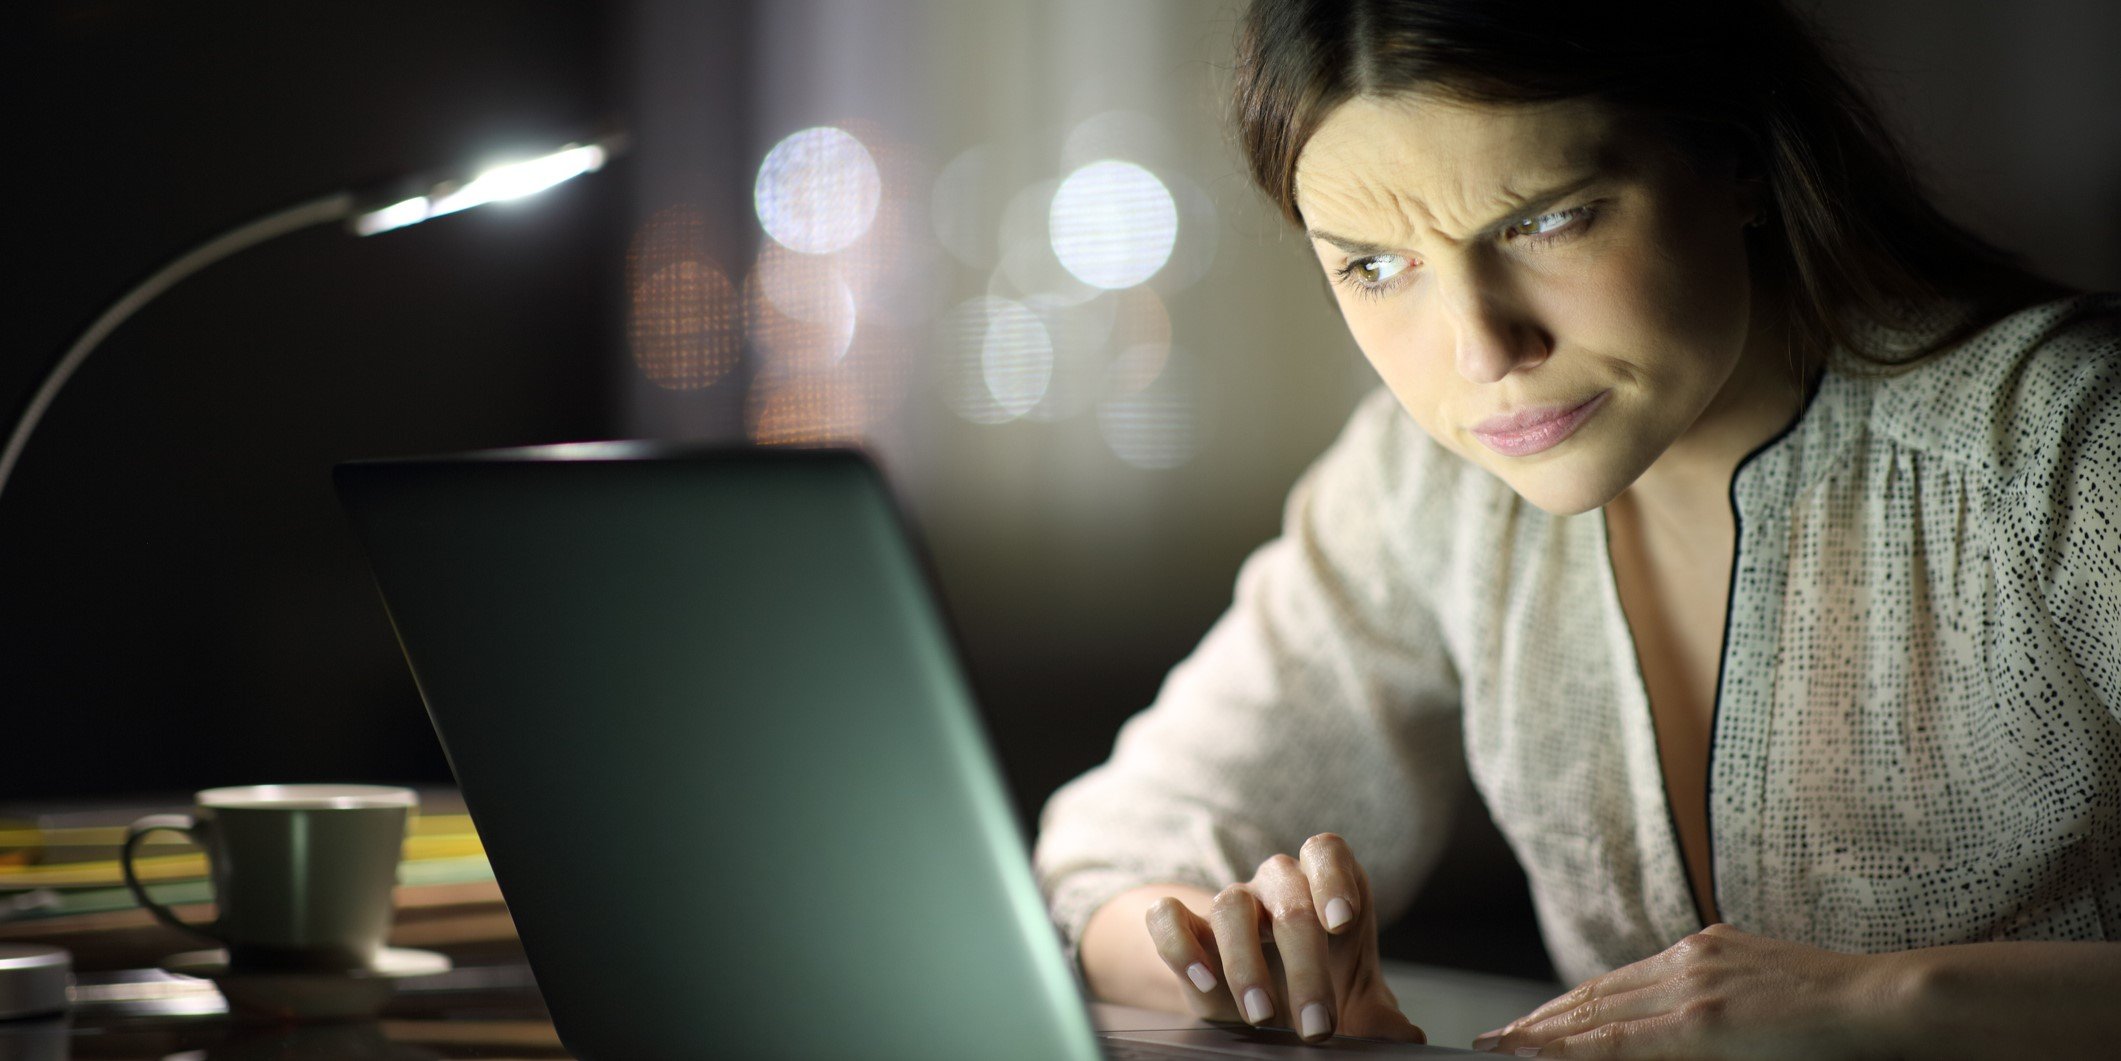 A woman looking at her laptop with a suspicious expression